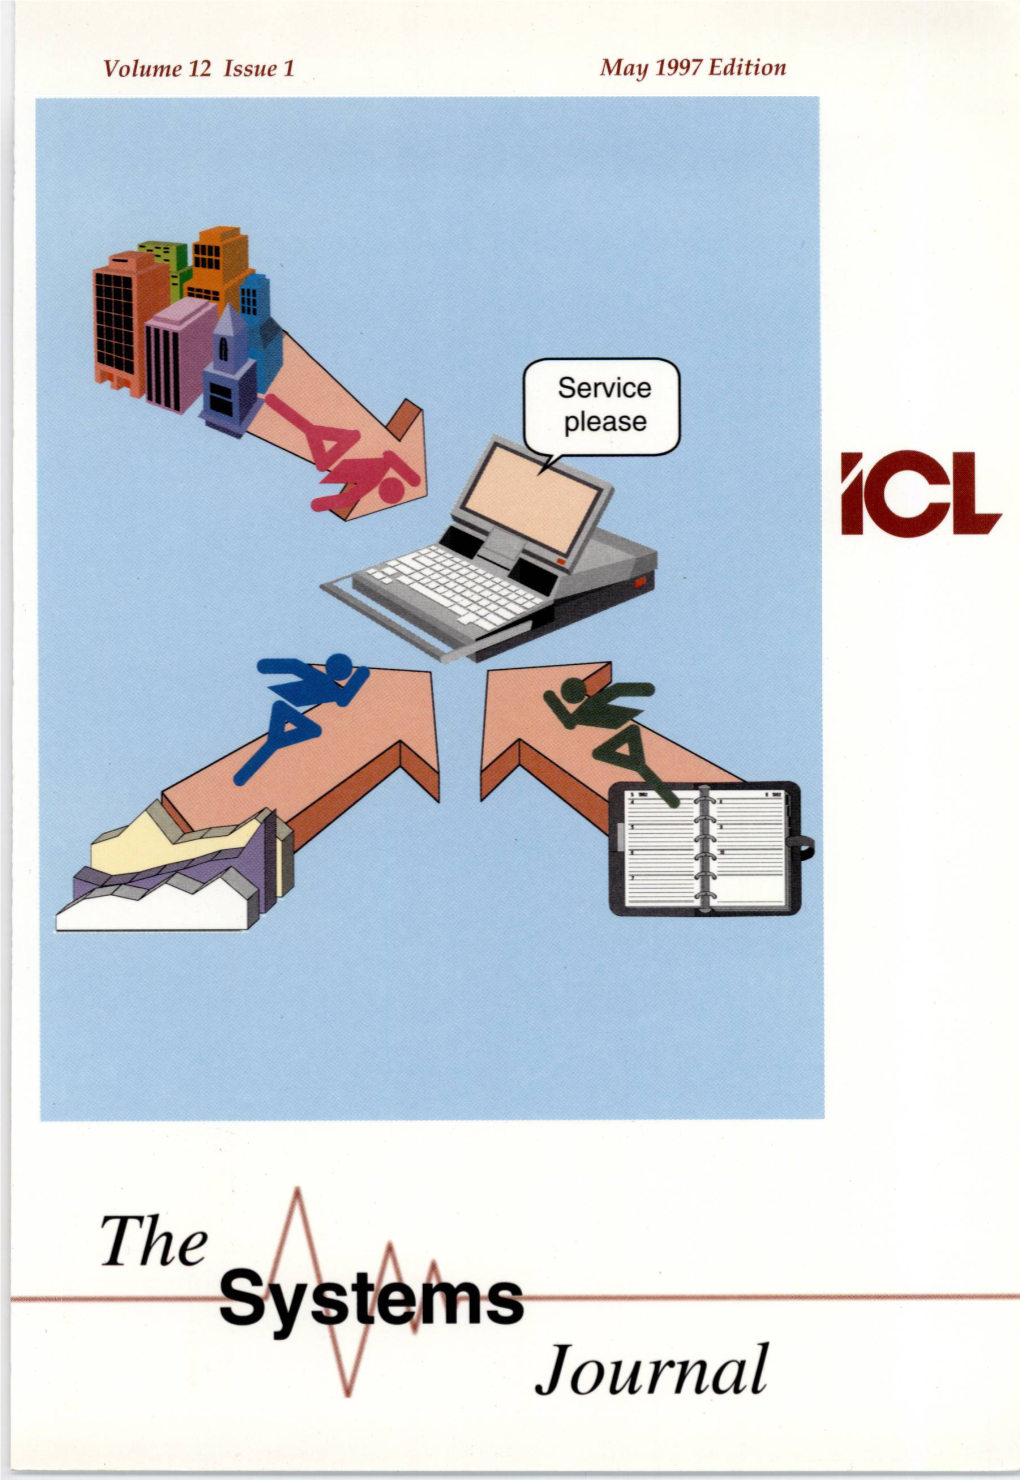 ICL Systems Journal